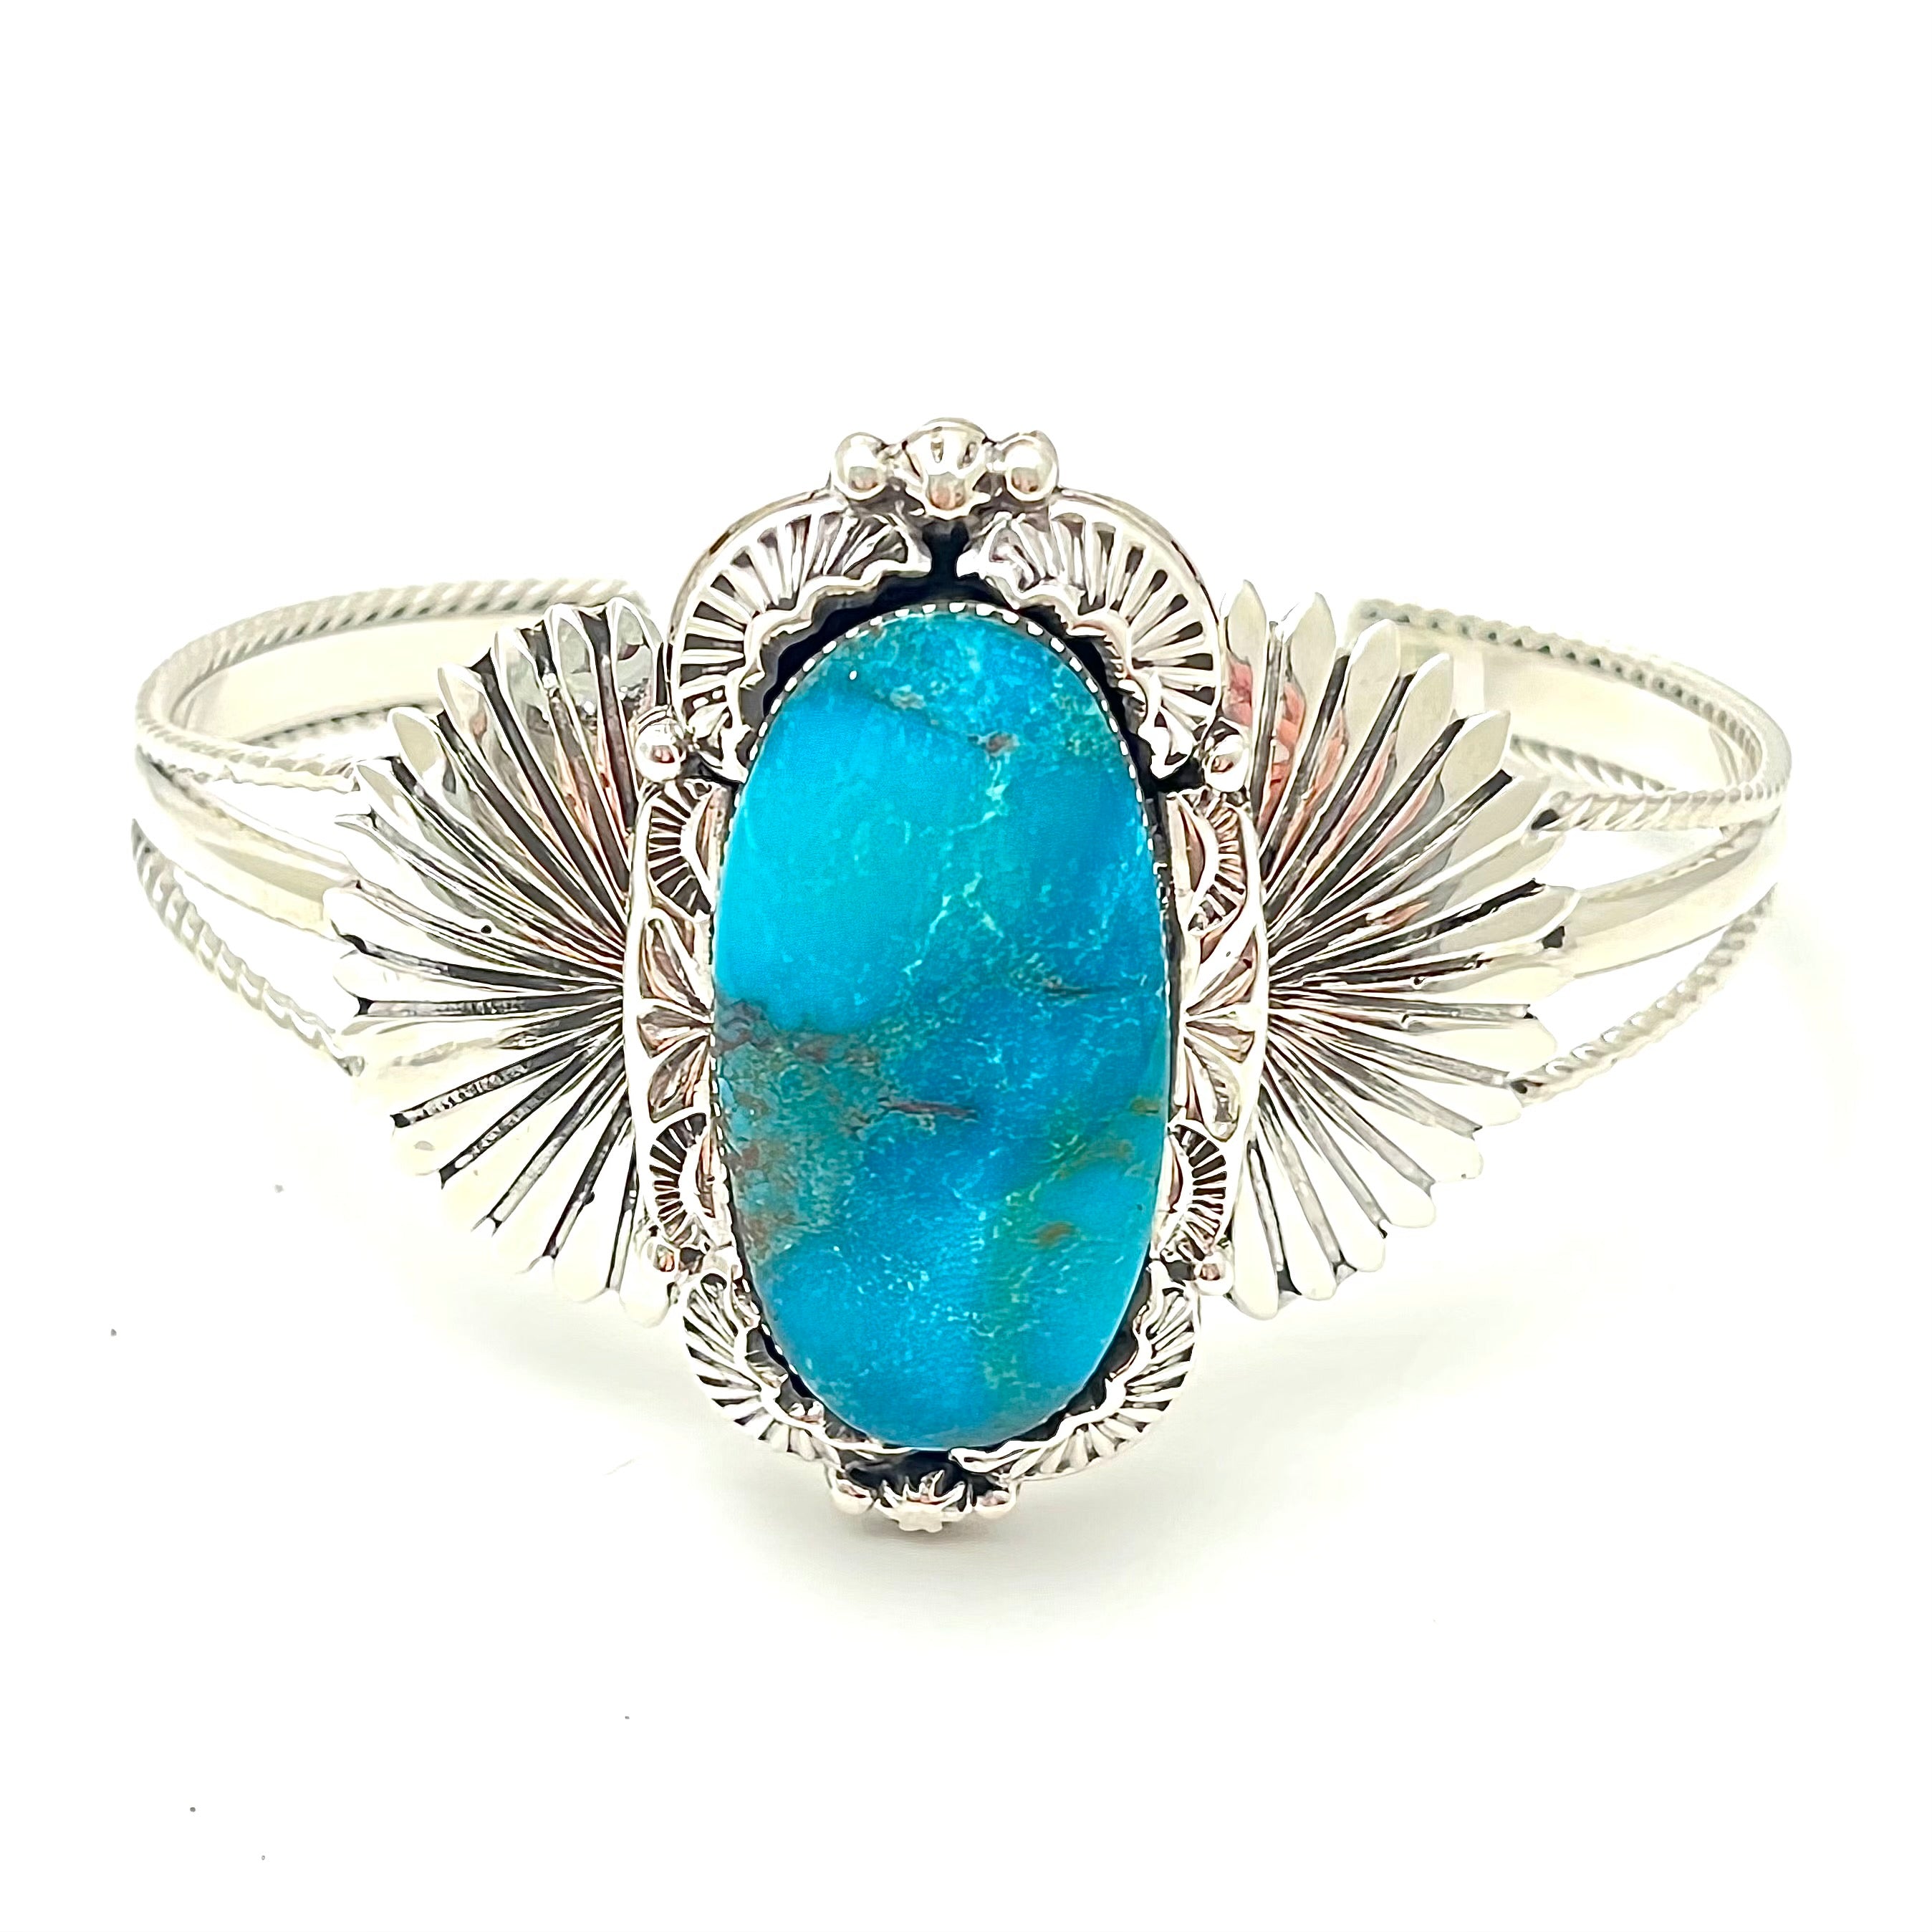 LARGE TURQUOISE AND SILVER CUFF